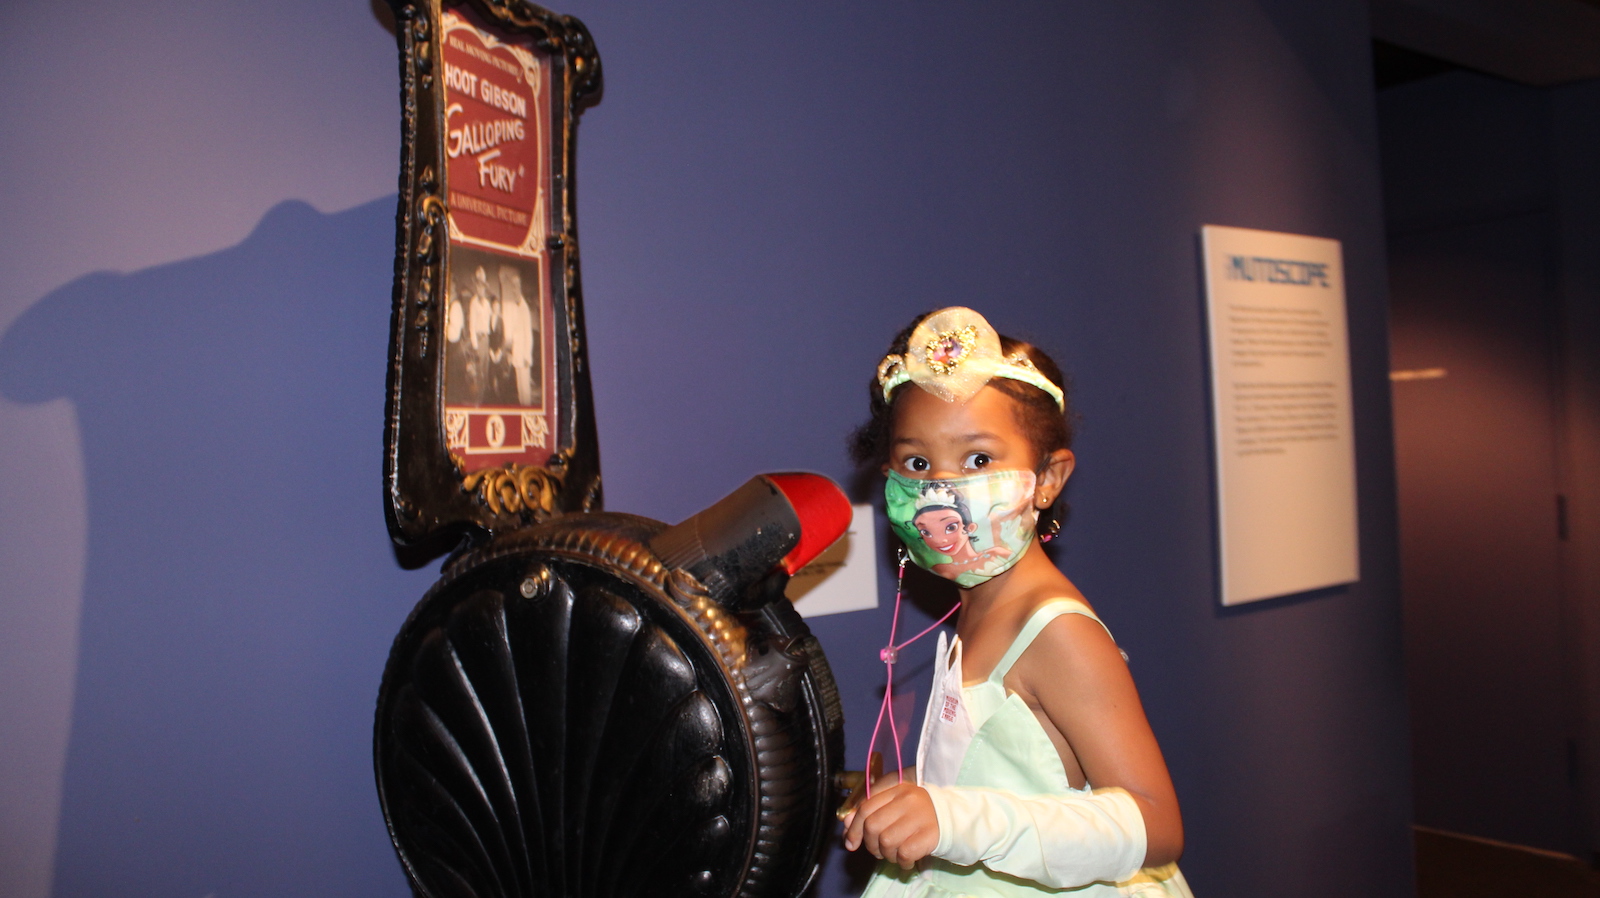 A little girl in a white dress and facemask looks at camera while standing next to a mutoscope device at Museum of the Moving Image